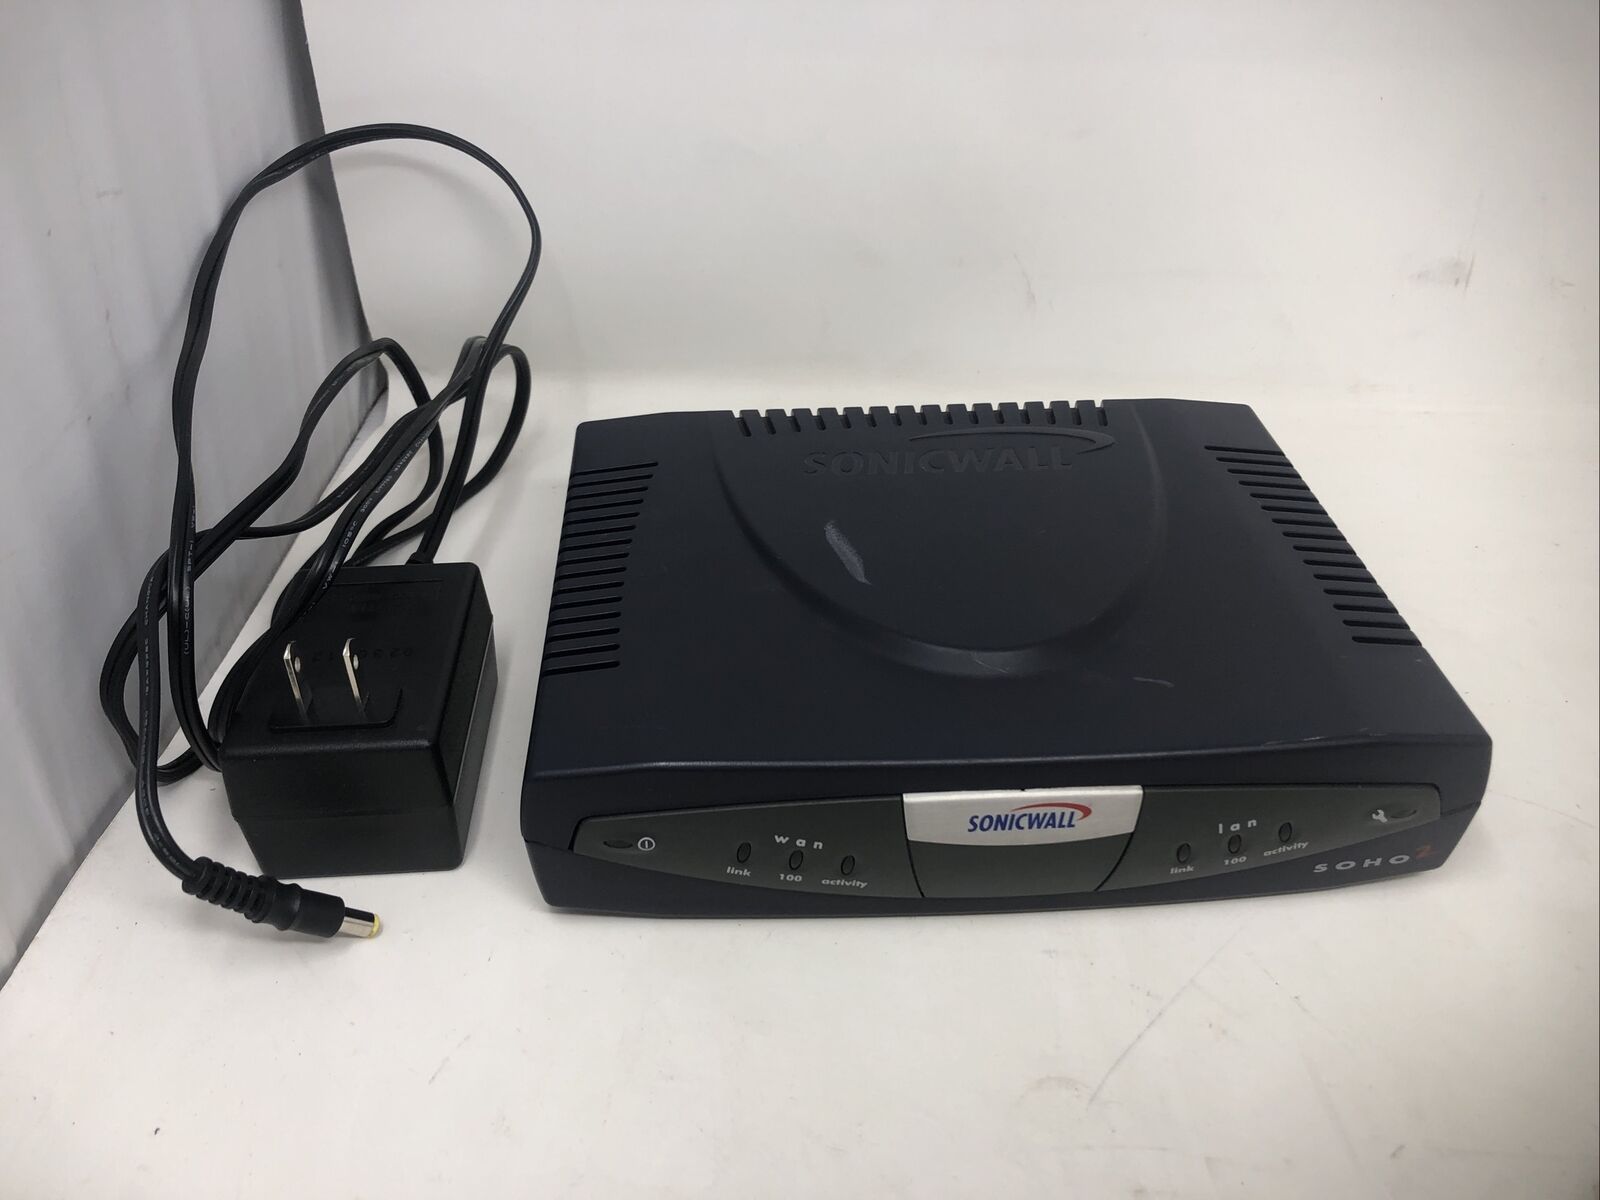 SONICWALL SOHO 2 FIREWALL INTERNET SECURITY - PREOWNED